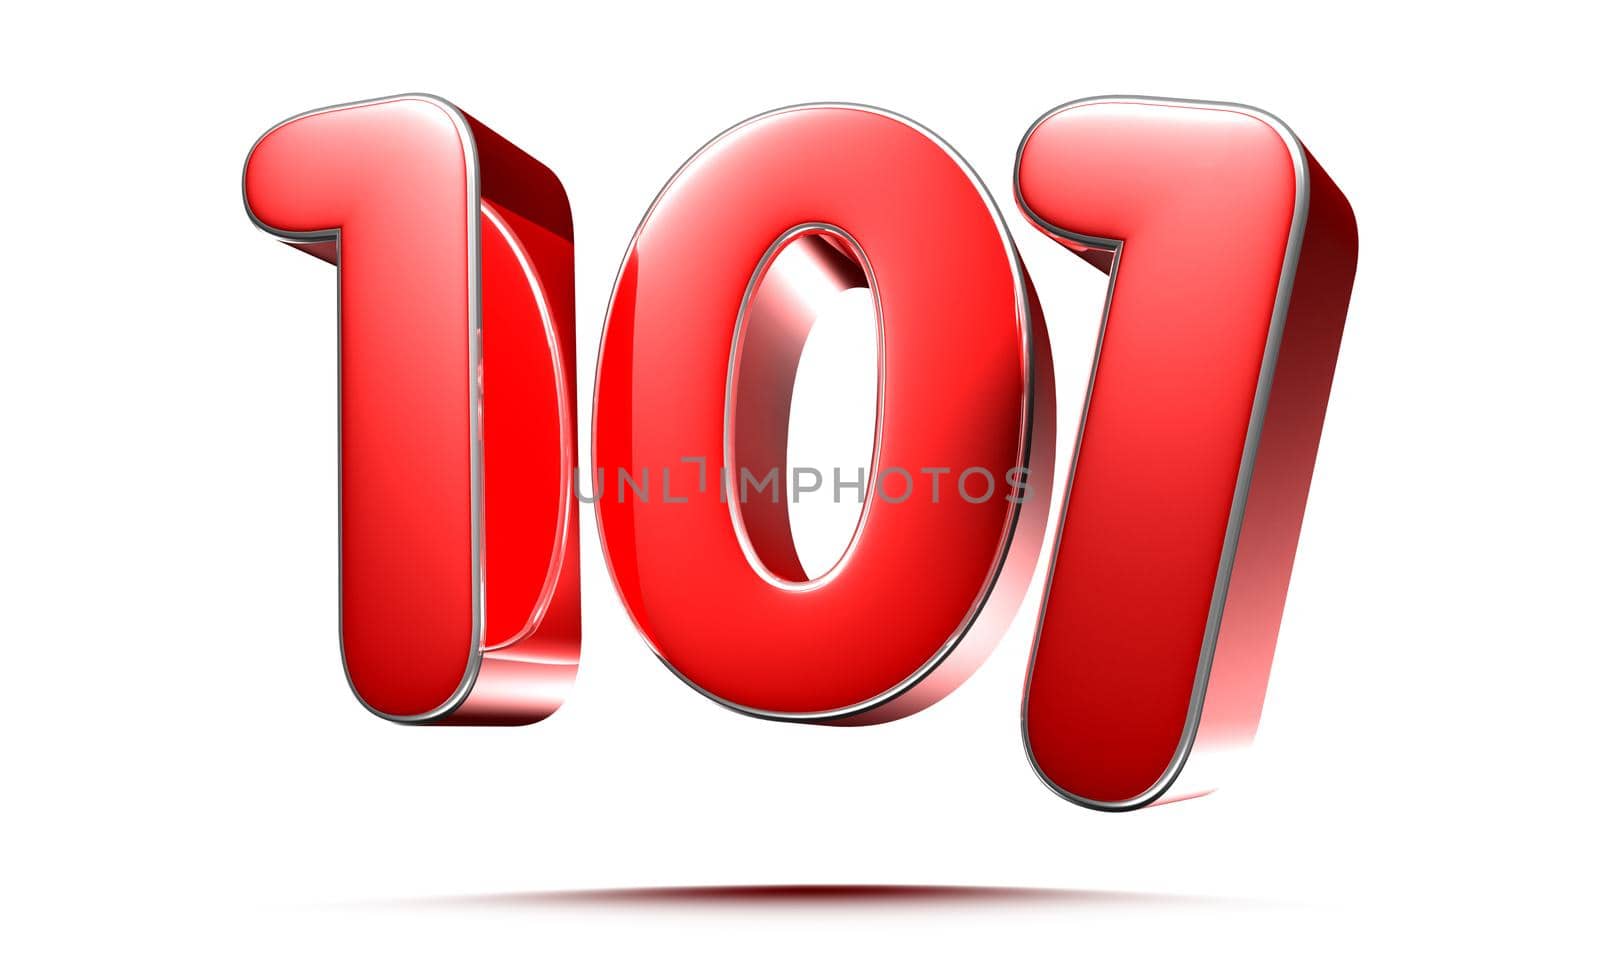 Rounded red numbers 101 on white background 3D illustration with clipping path